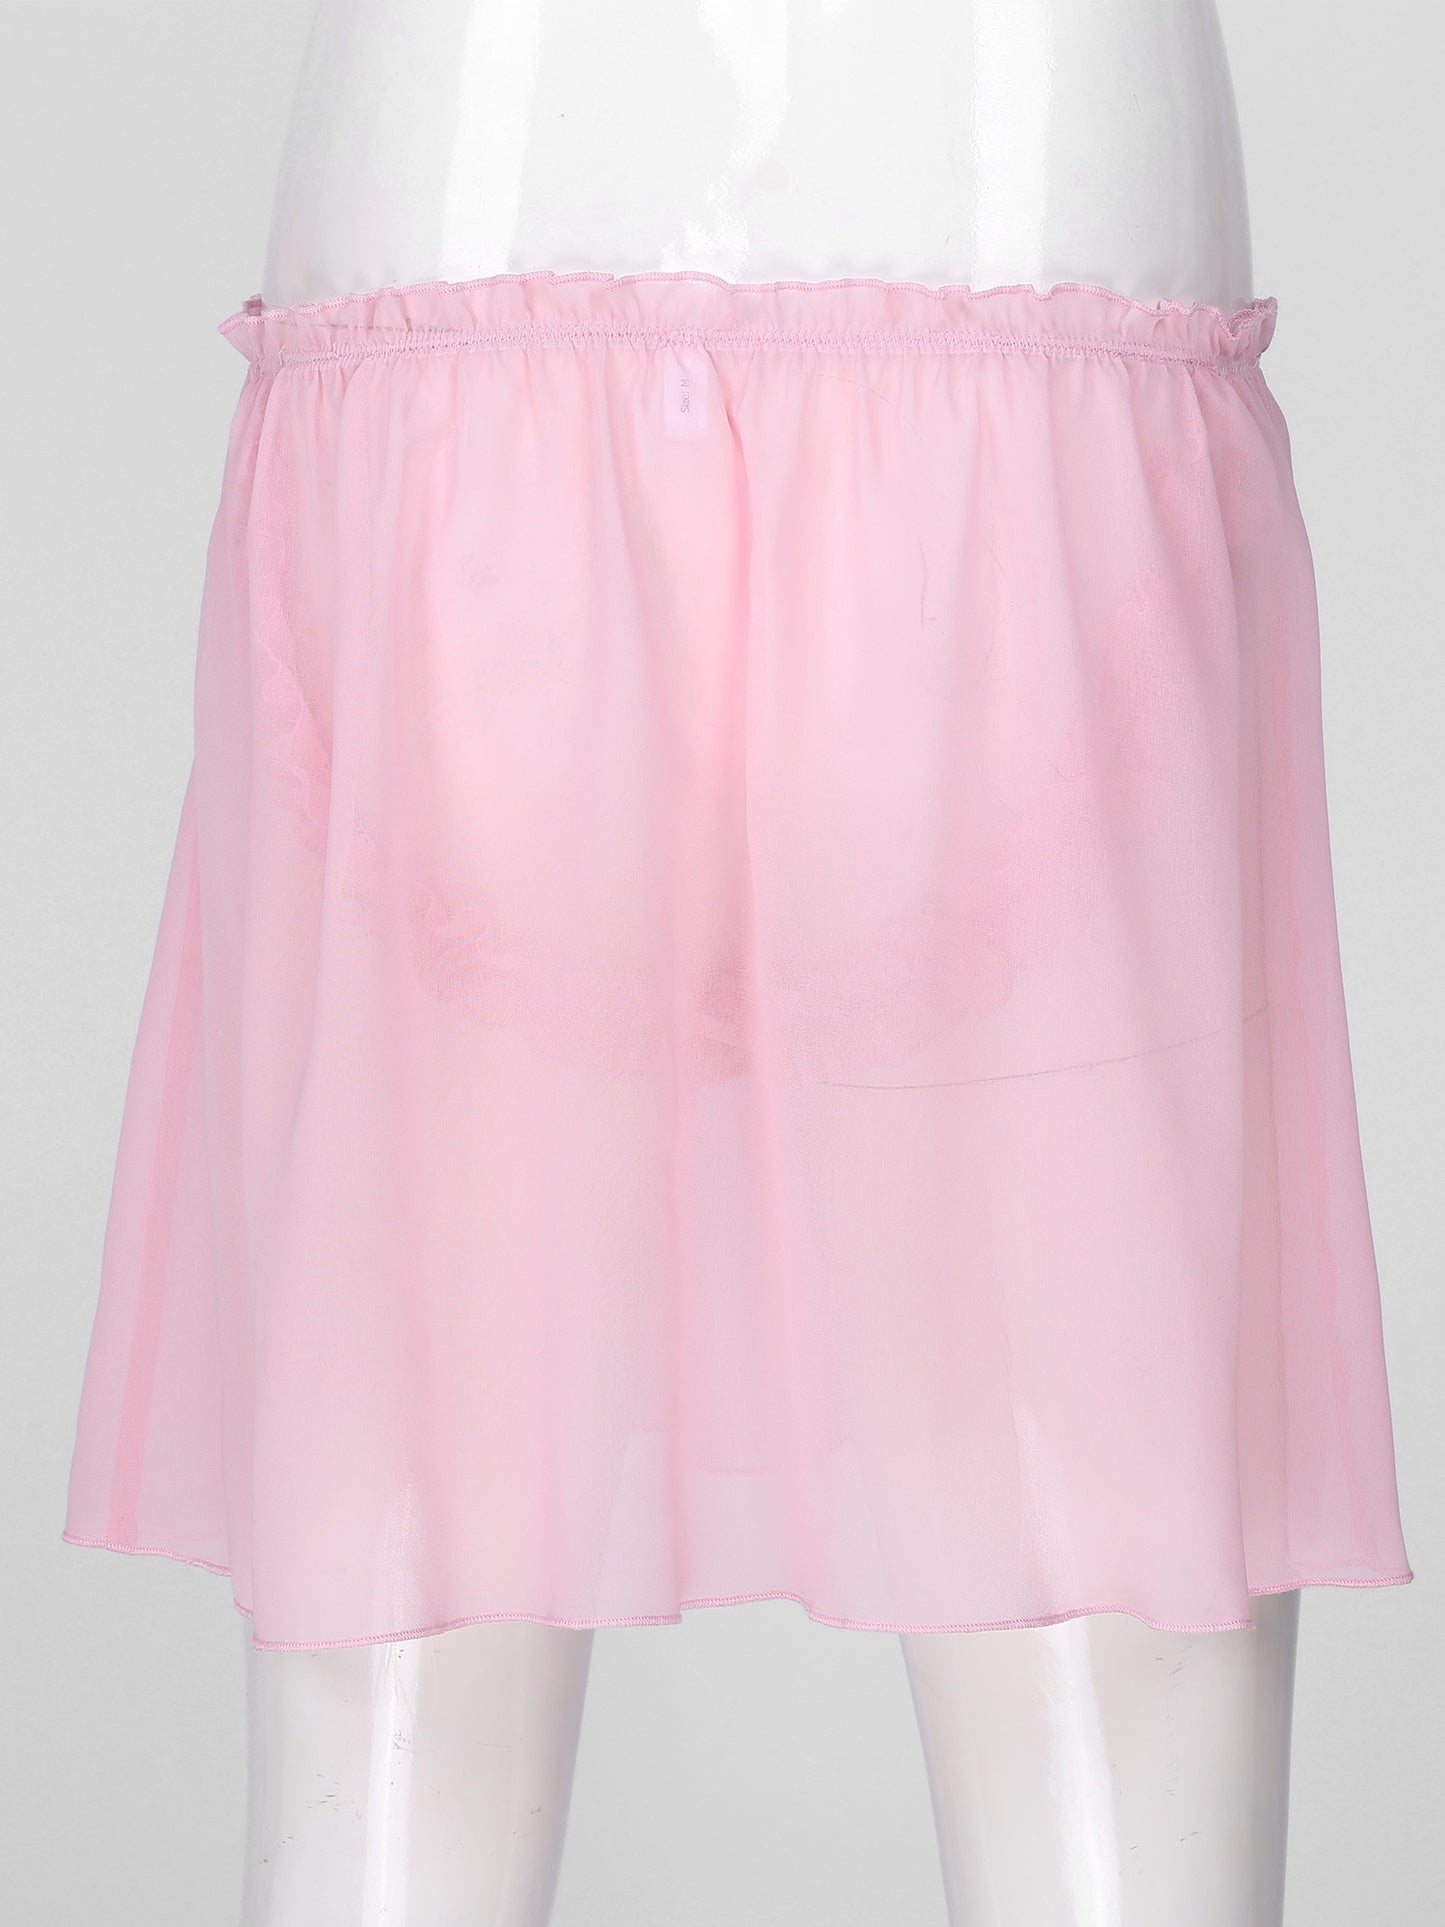 Semi-see Through Pink Bowknot Frilly Mini Skirt